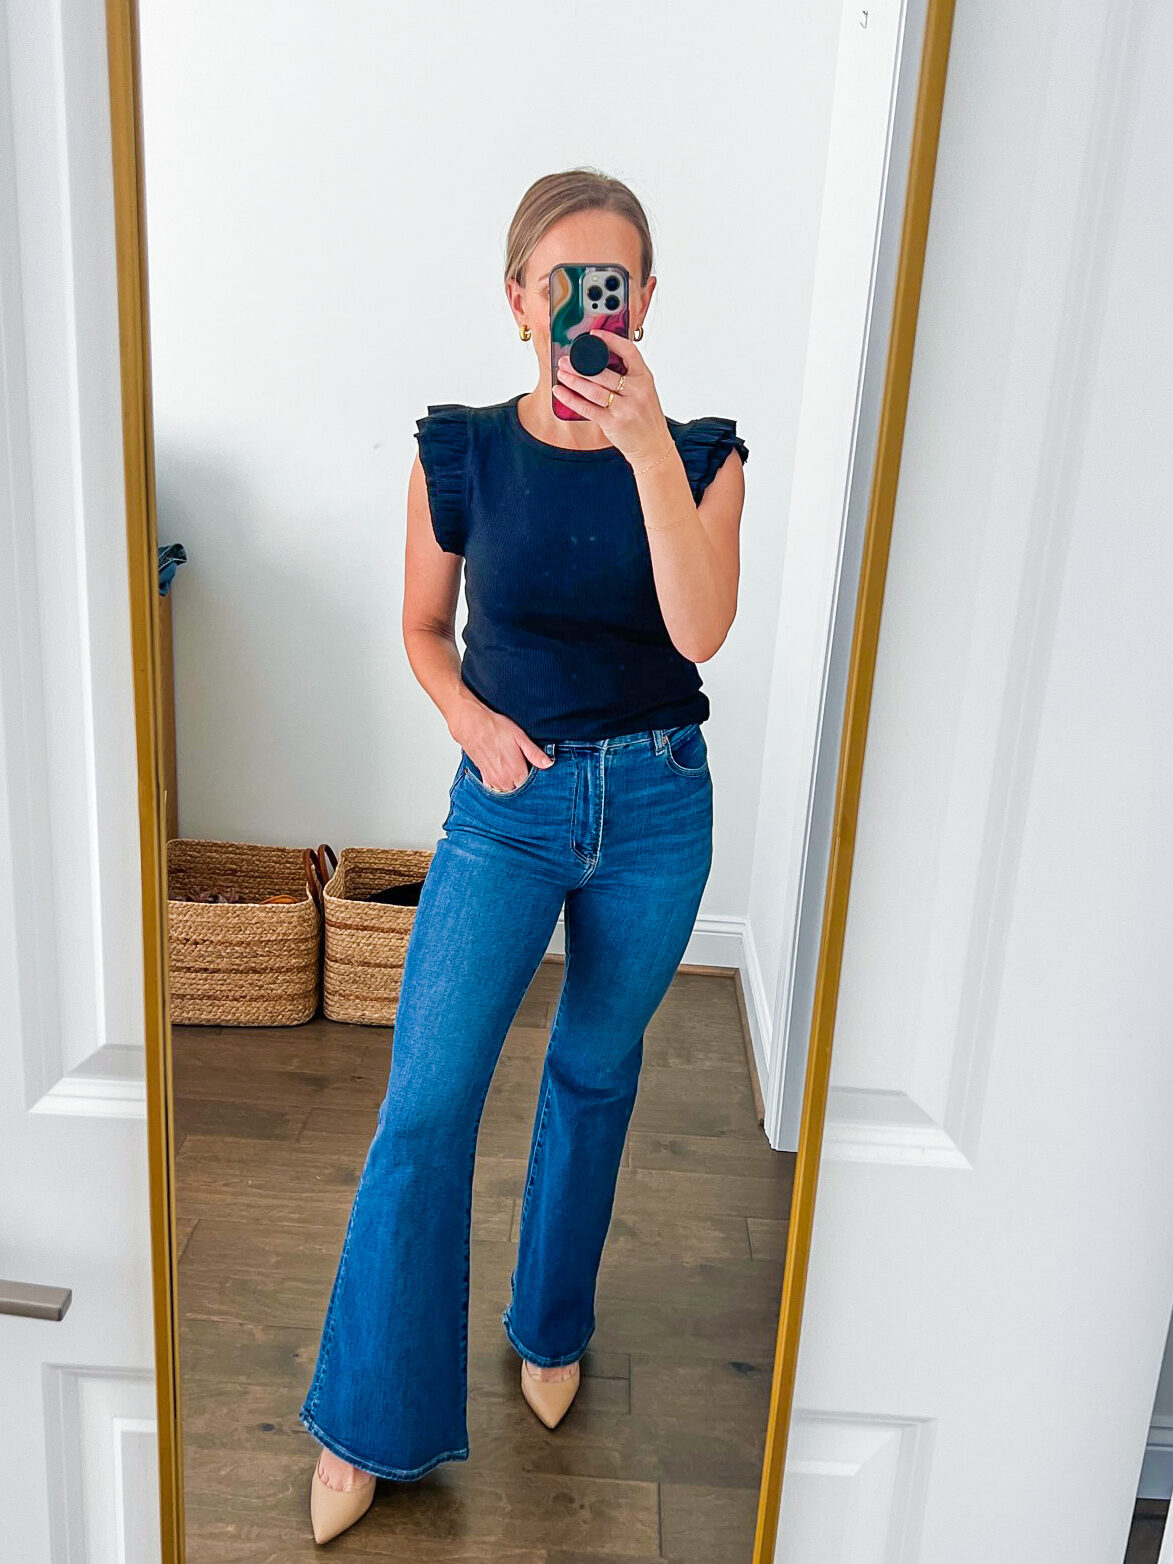 TeriLyn Adams wearing one of the Best Abercrombie Jeans in Ultra High Rise Flare Jean in black and dark blue wash